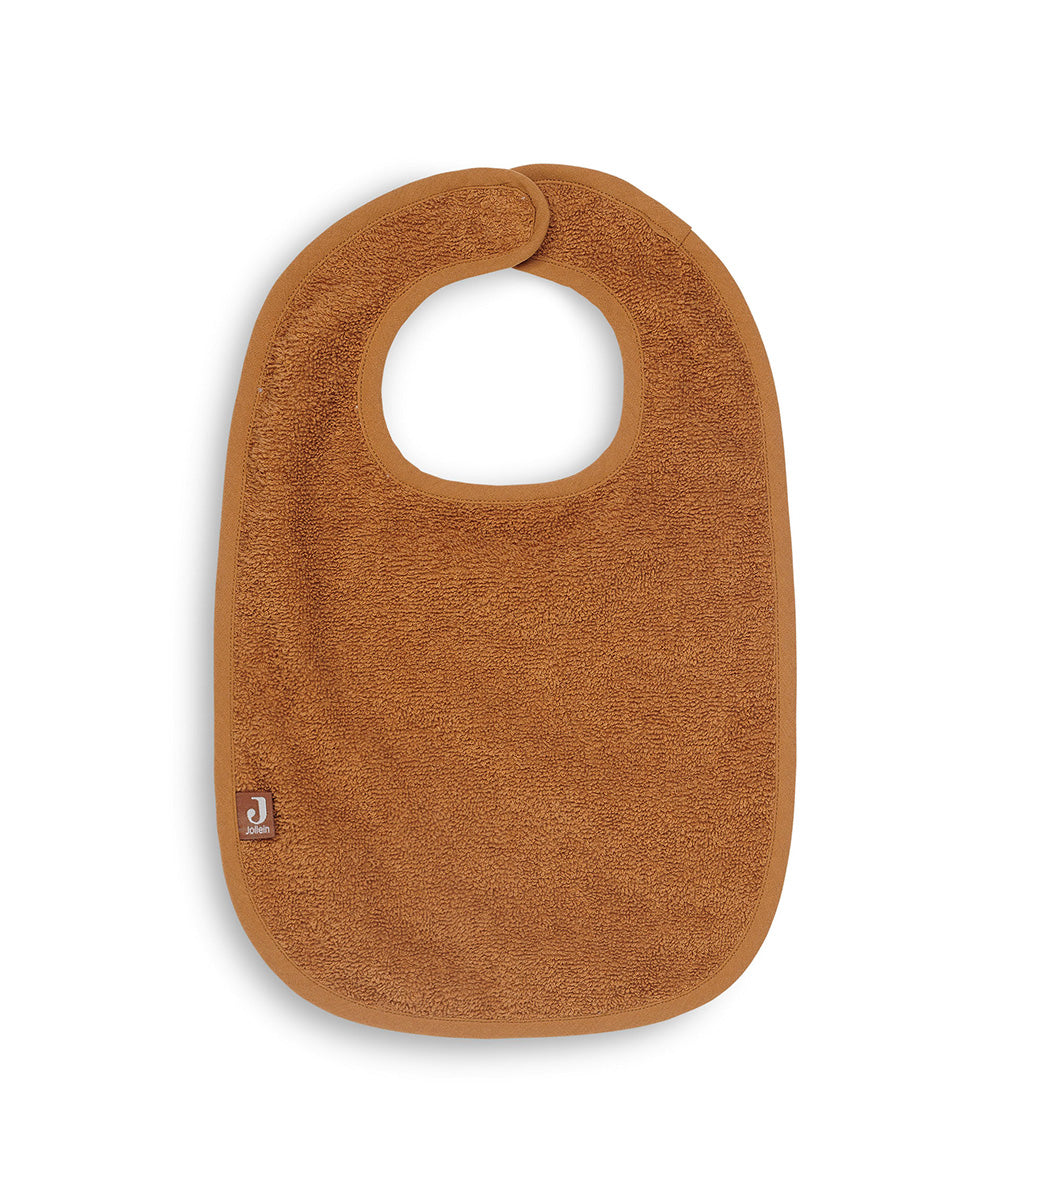 Bib // Caramel - embroidered with name